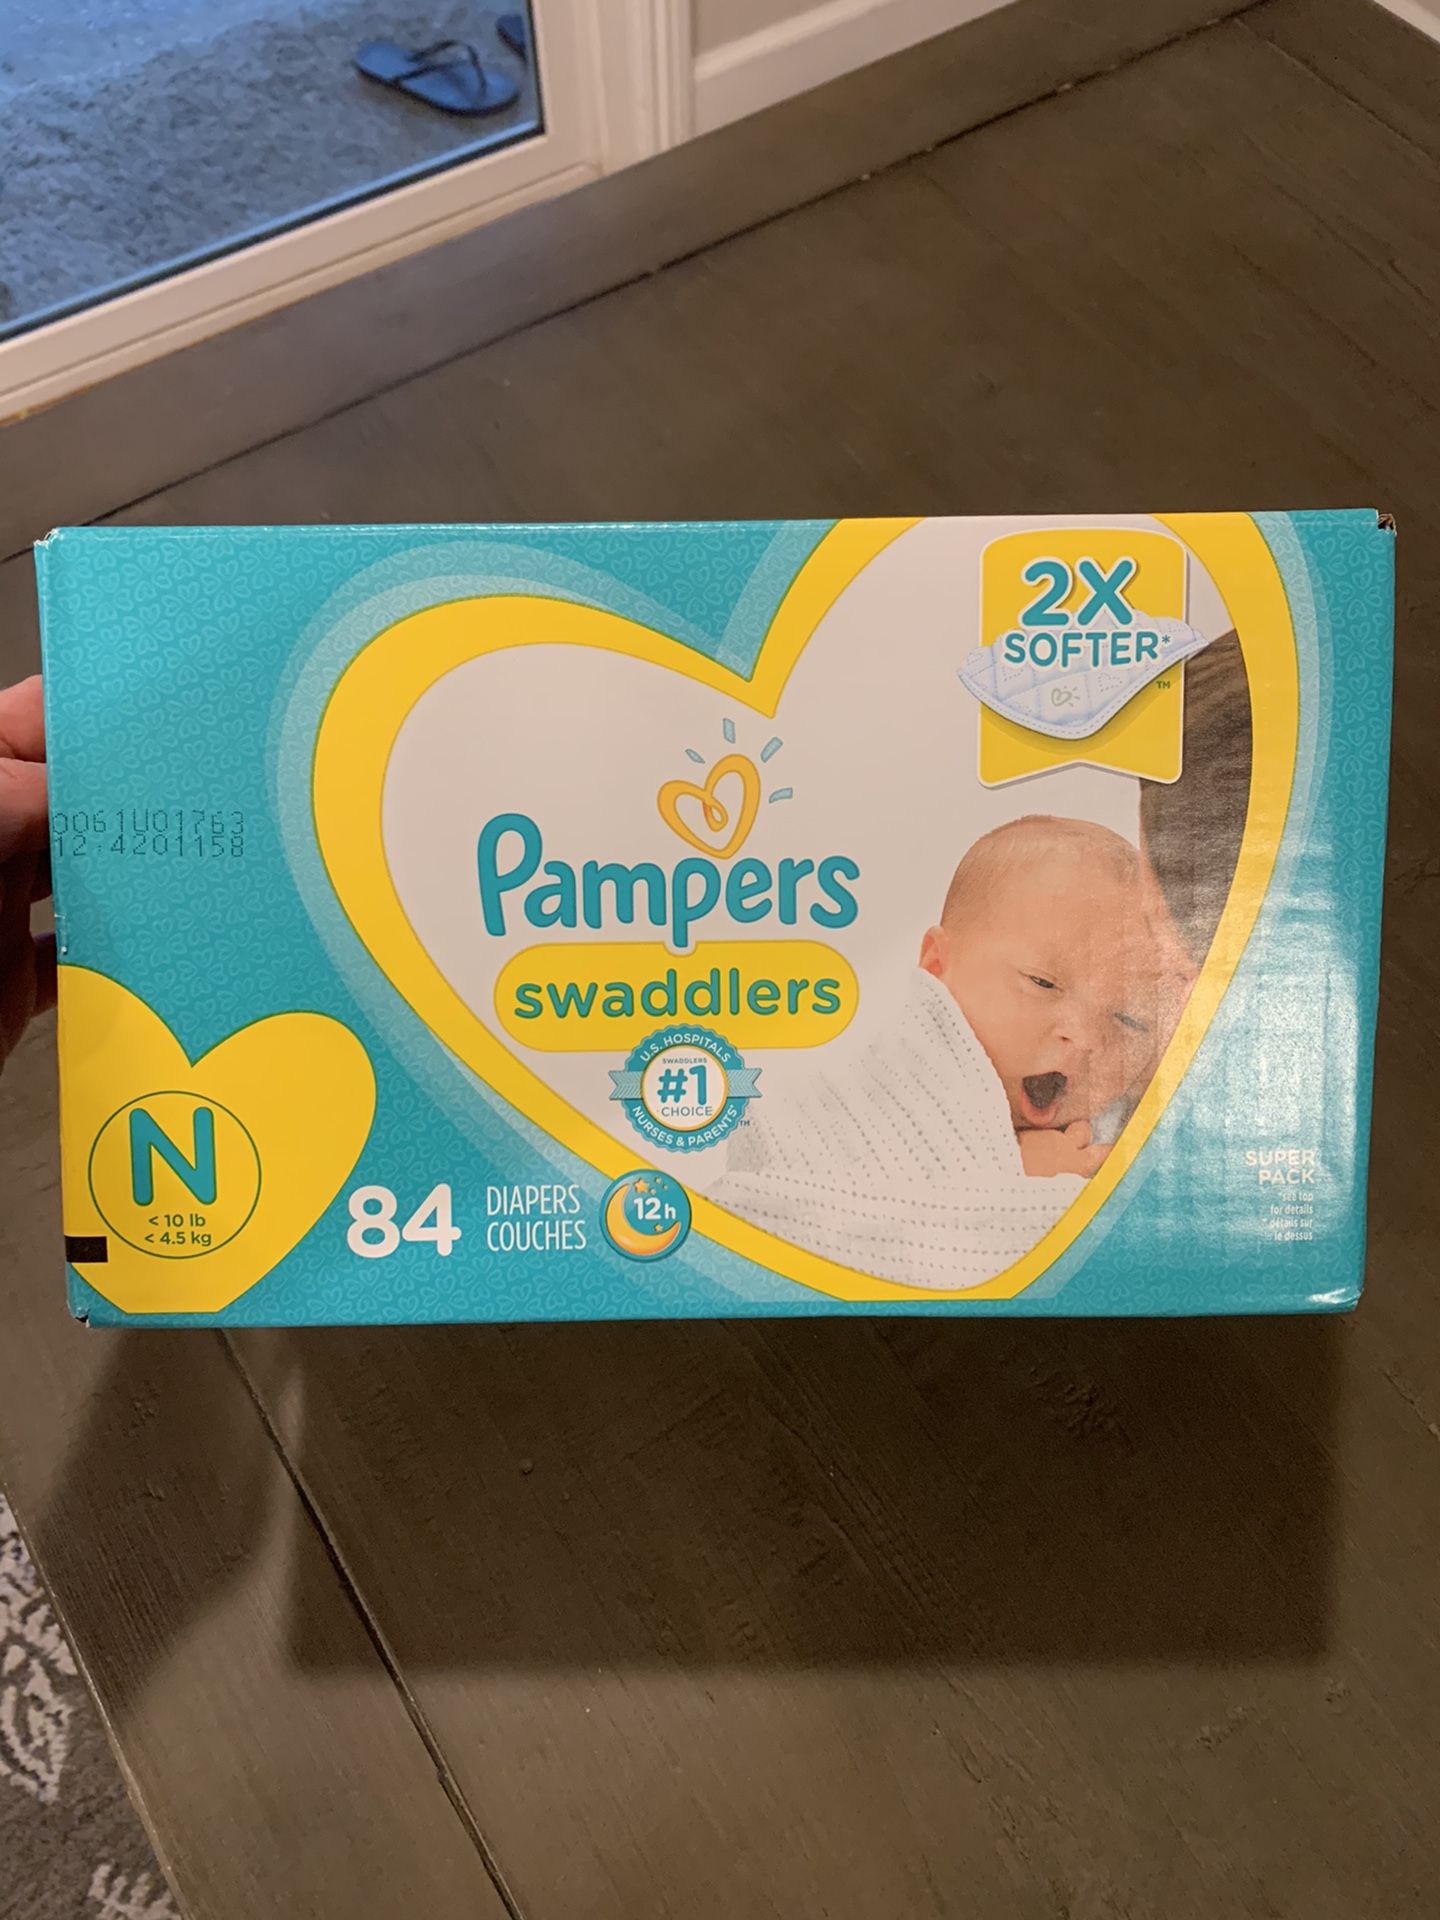 Diapers Newborn - 84 Count - Pampers Swaddlers Disposable Baby Diapers